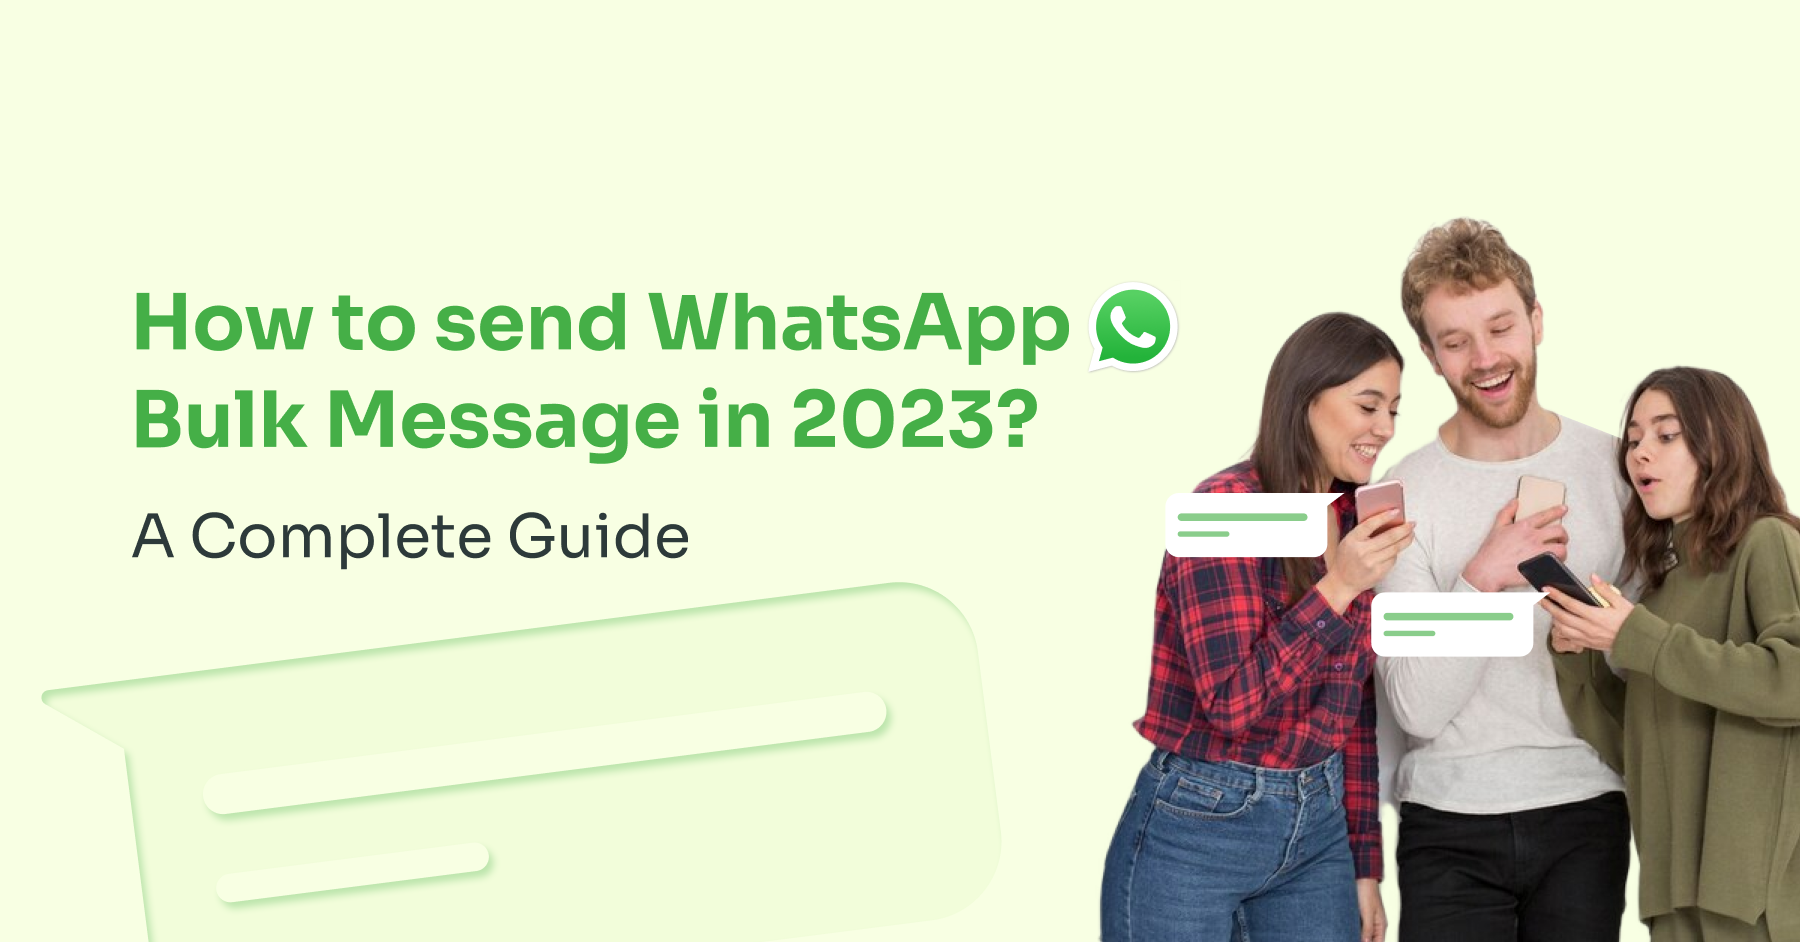 How to send WhatsApp Bulk Message in 2023? A Complete Guide